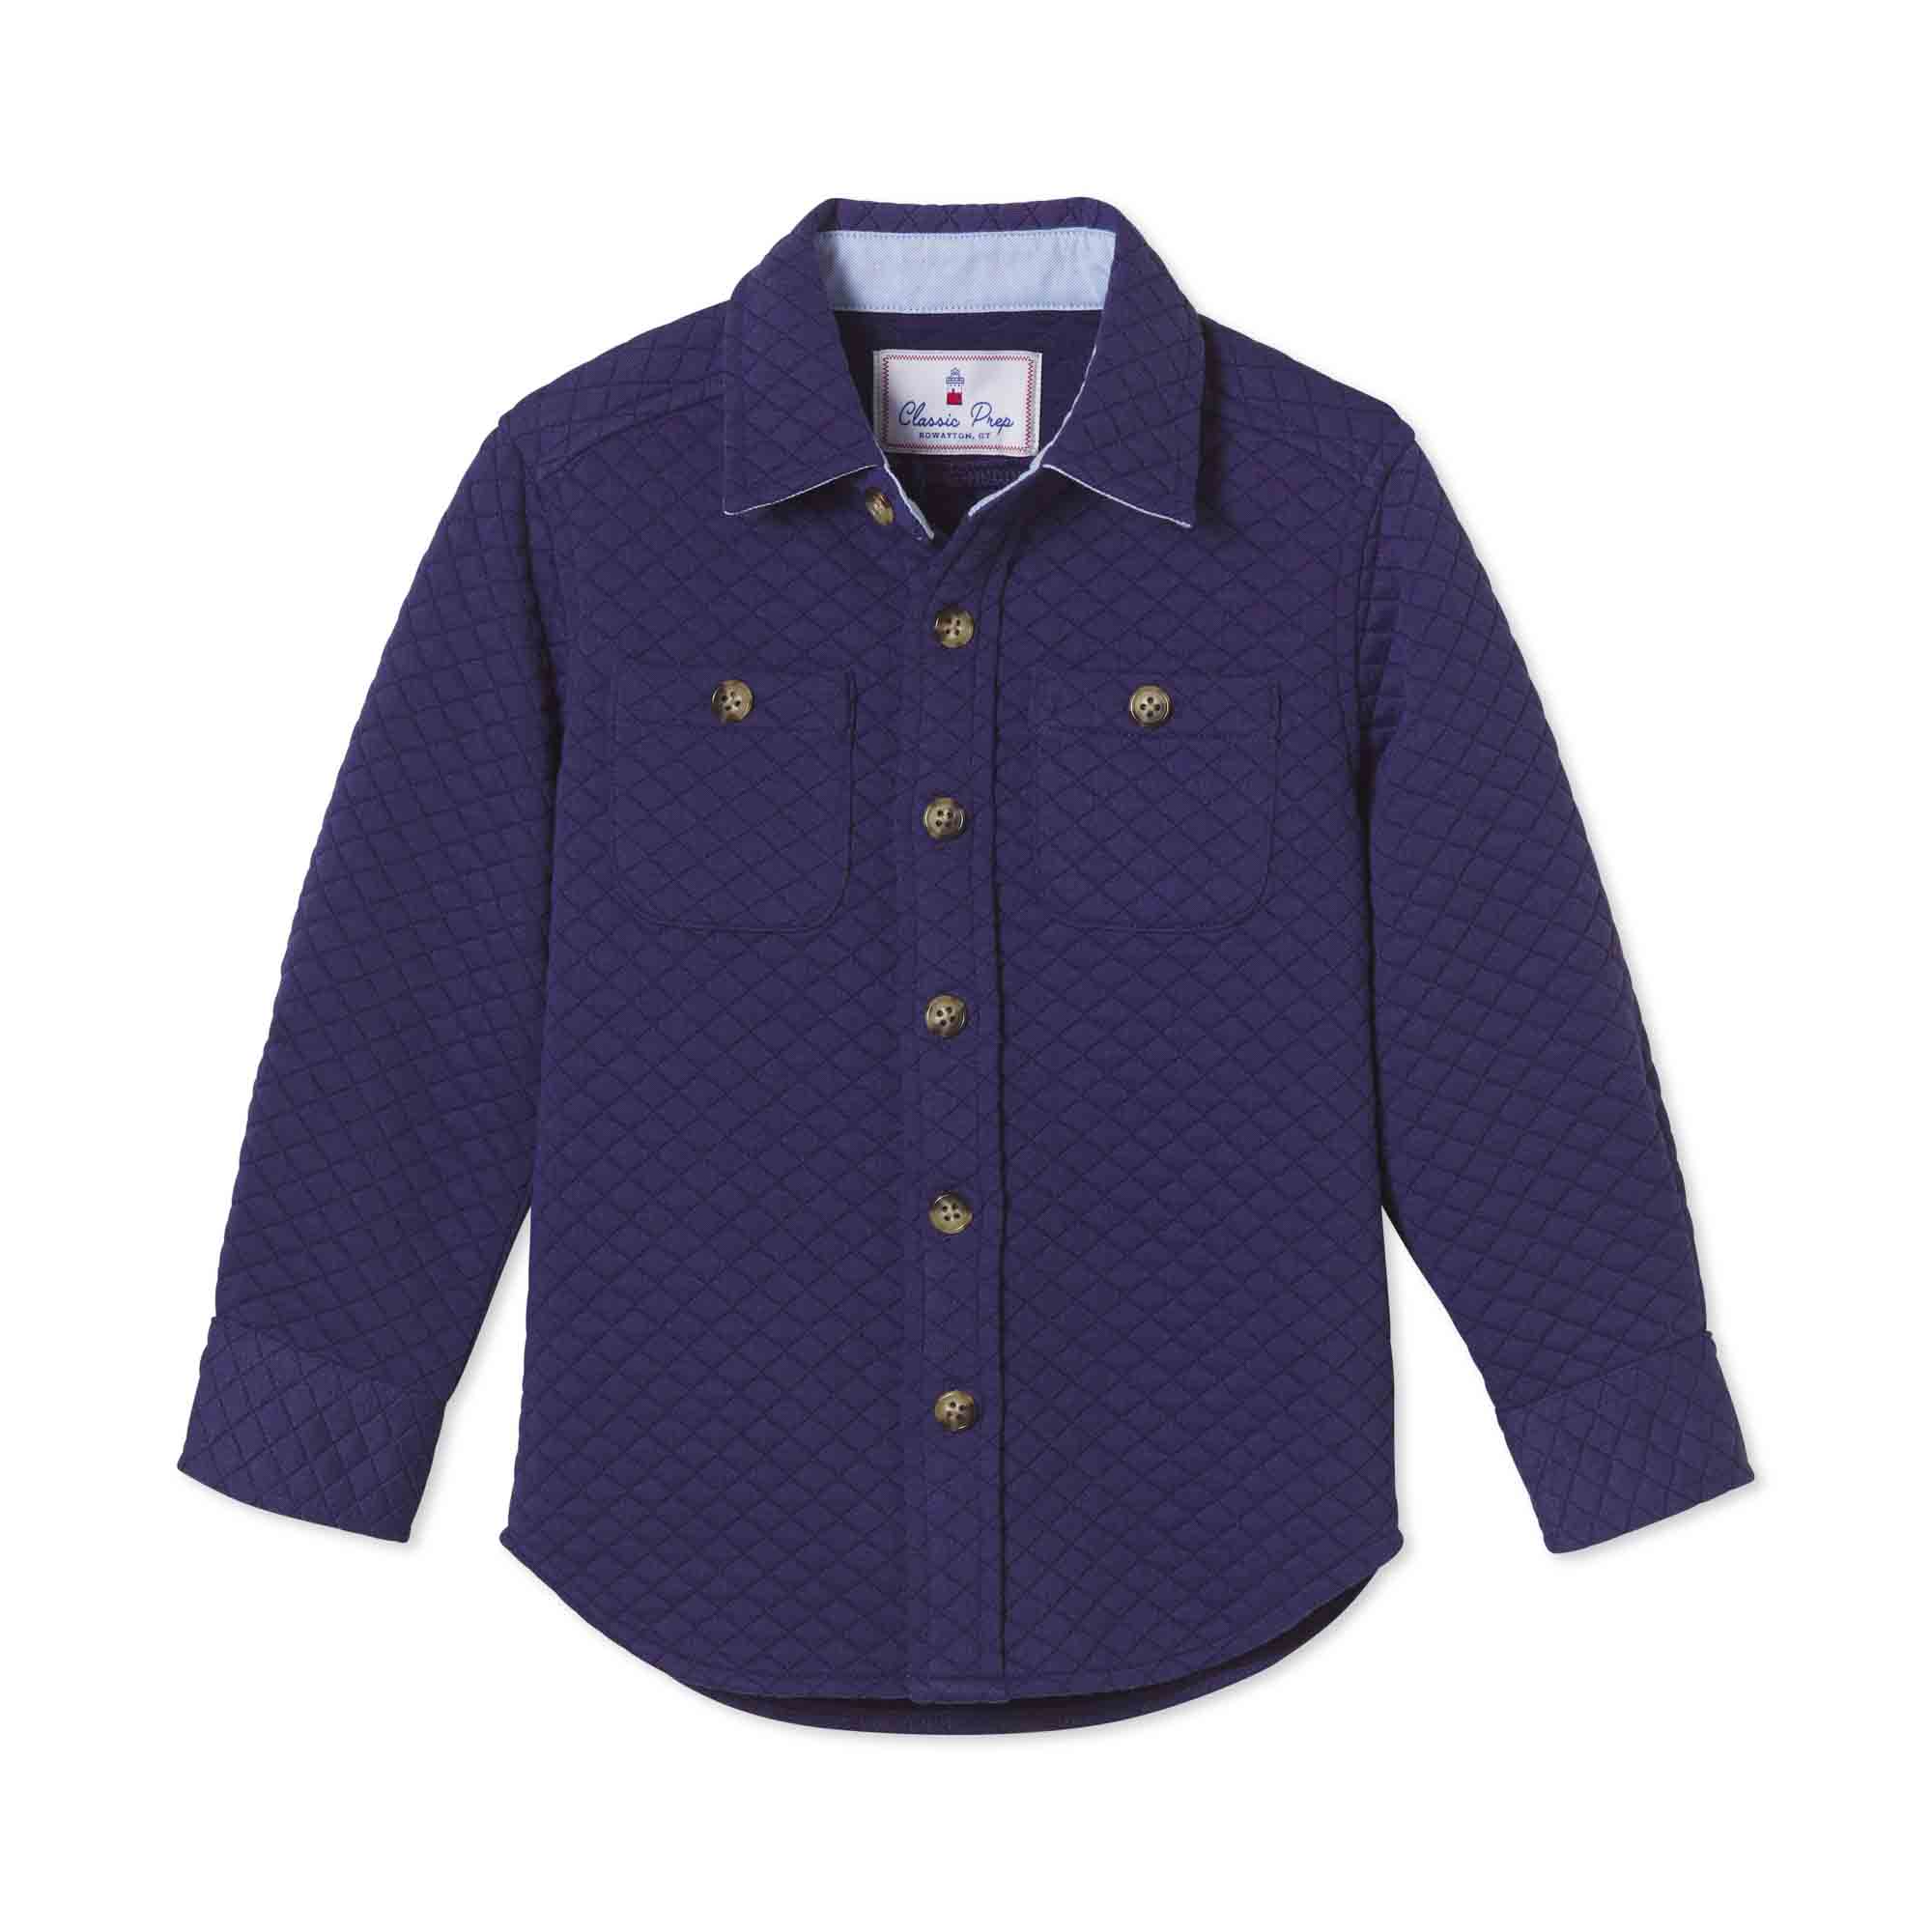 Grant Shirt Quilted Jacket, Blue Ribbon